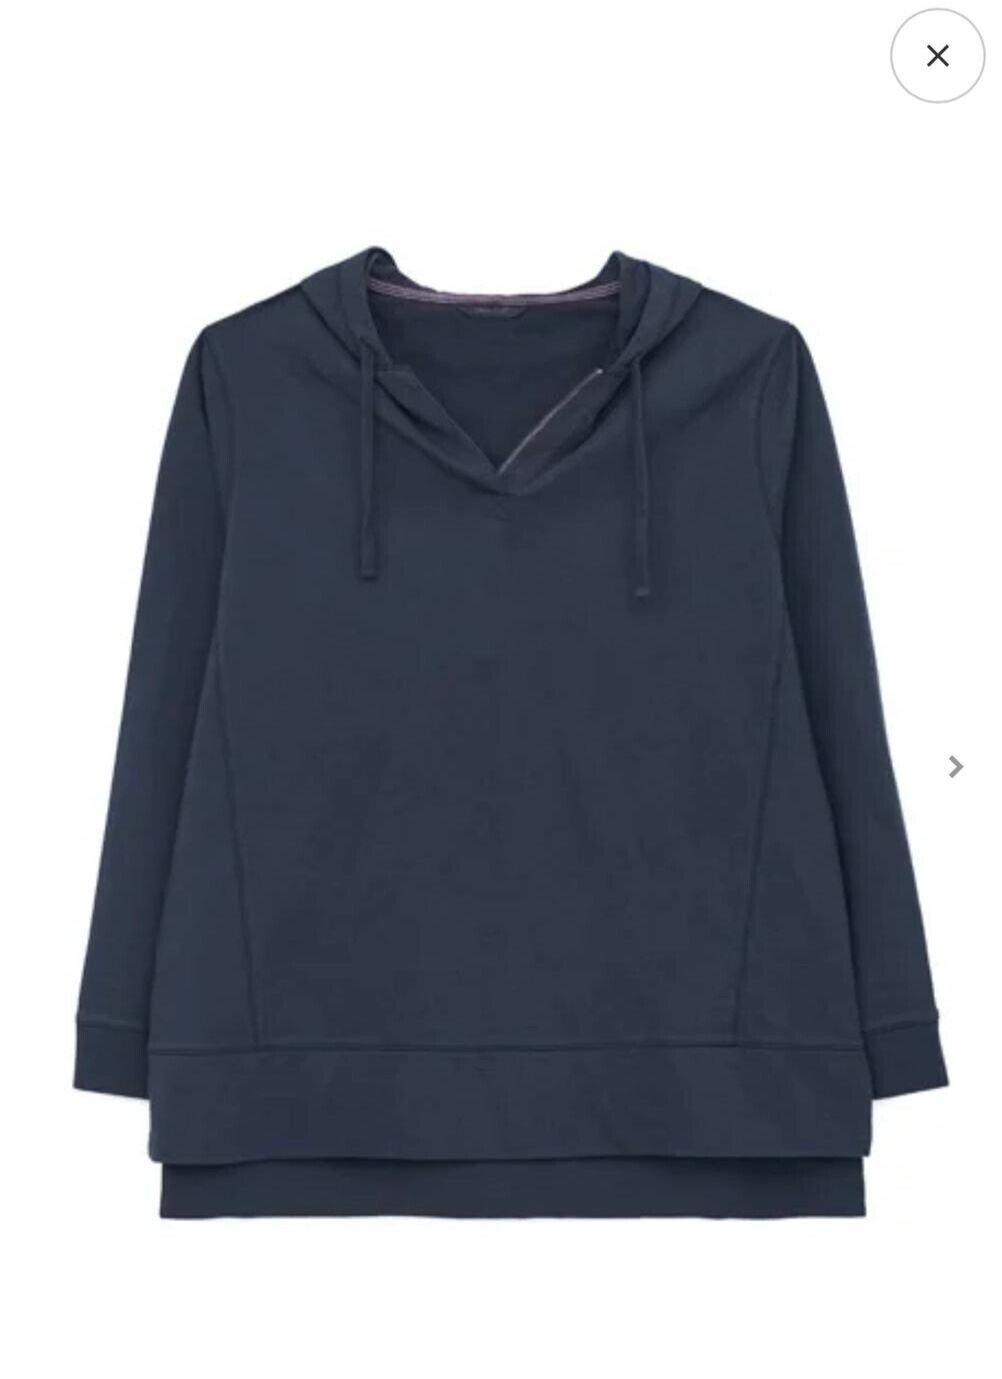 EX WHITE STUFF French Navy Pure Cotton Hooded Sweatshirt Sizes 8-20 RRP £45